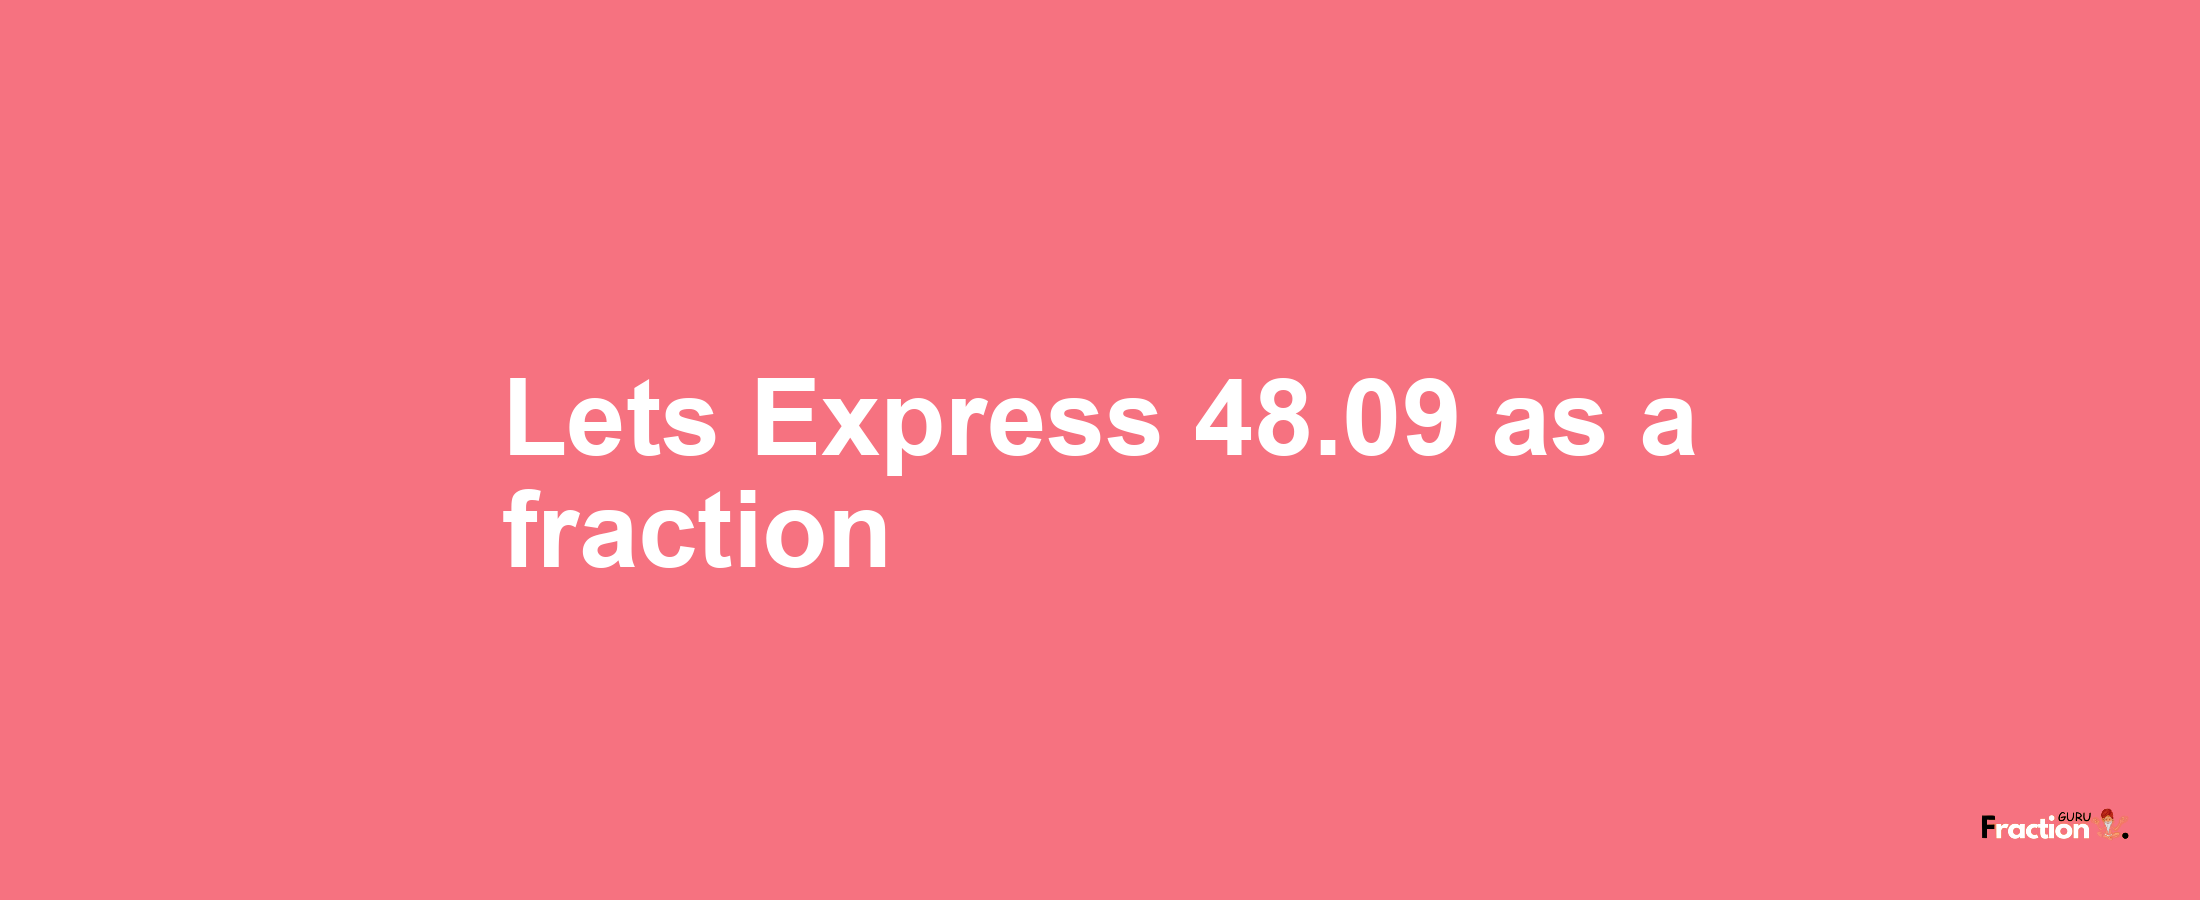 Lets Express 48.09 as afraction